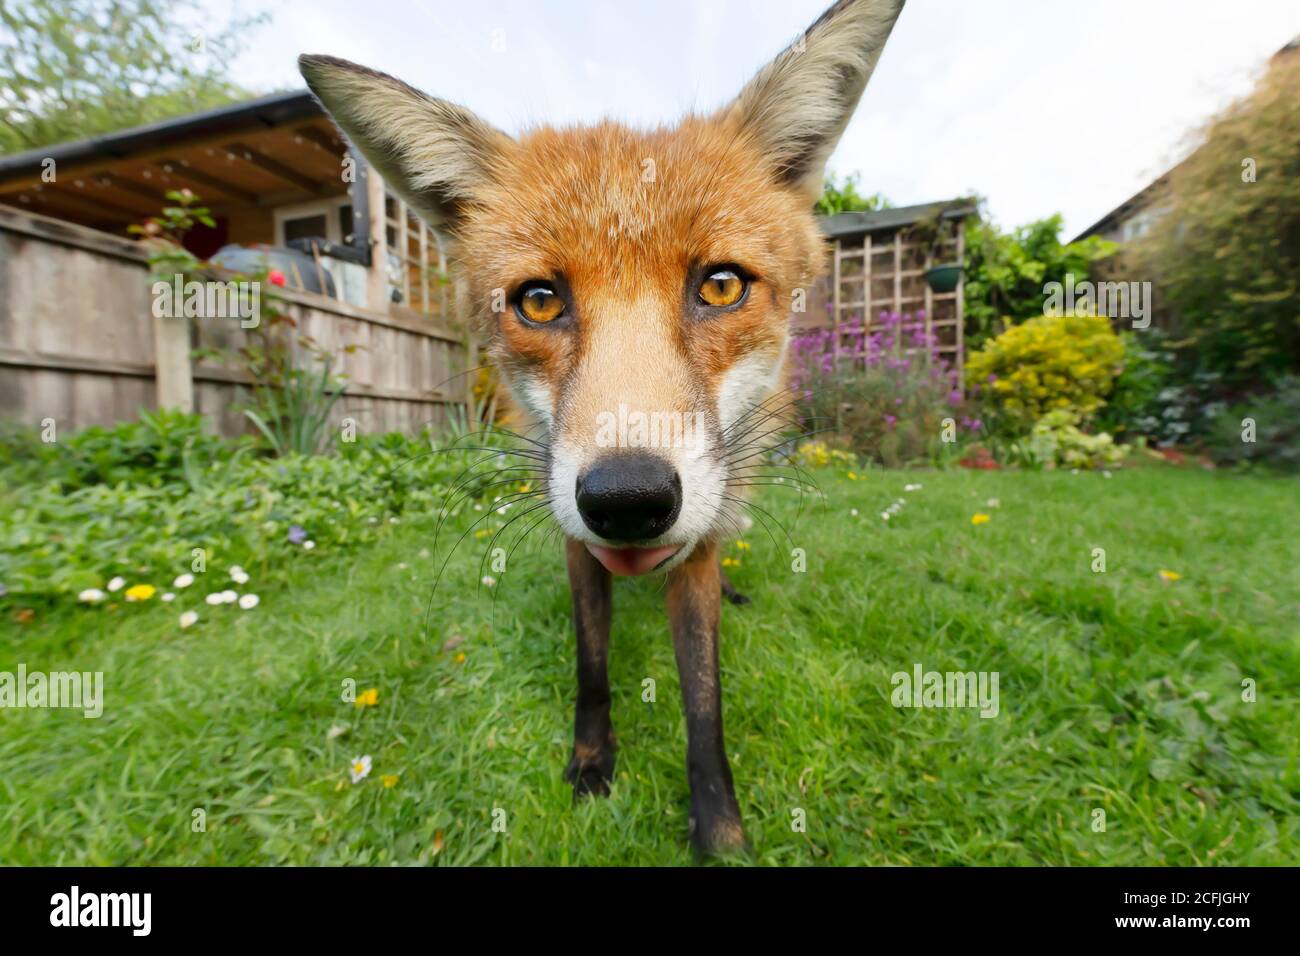 Portrait of a red fox (Vulpes vulpes) standing in the garden, United Kingdom. Stock Photo